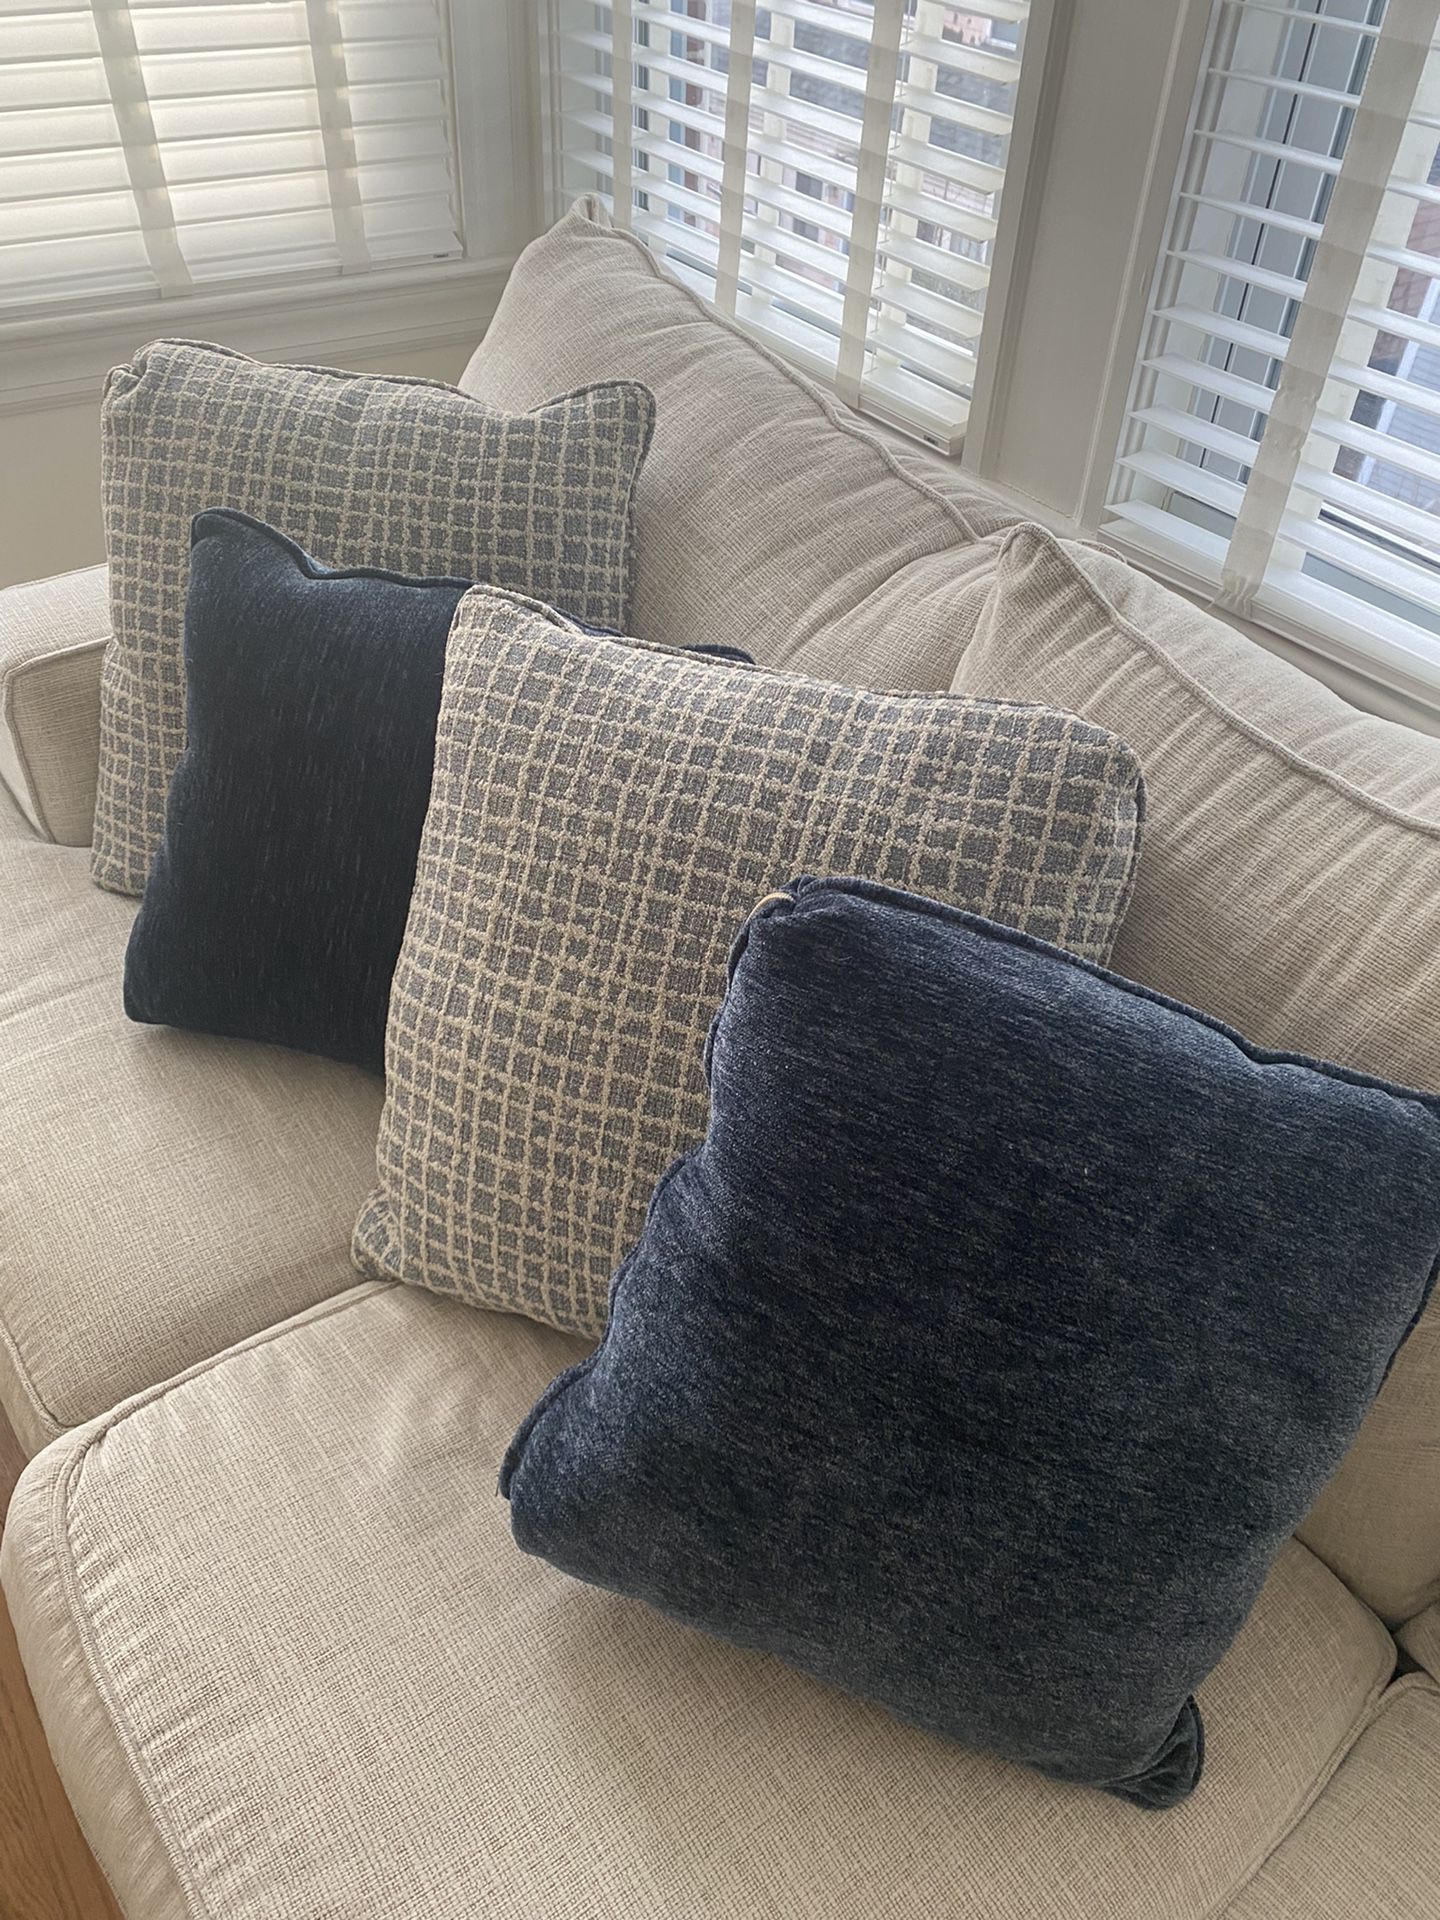 NWOT 4 accent throw pillows checked pillows